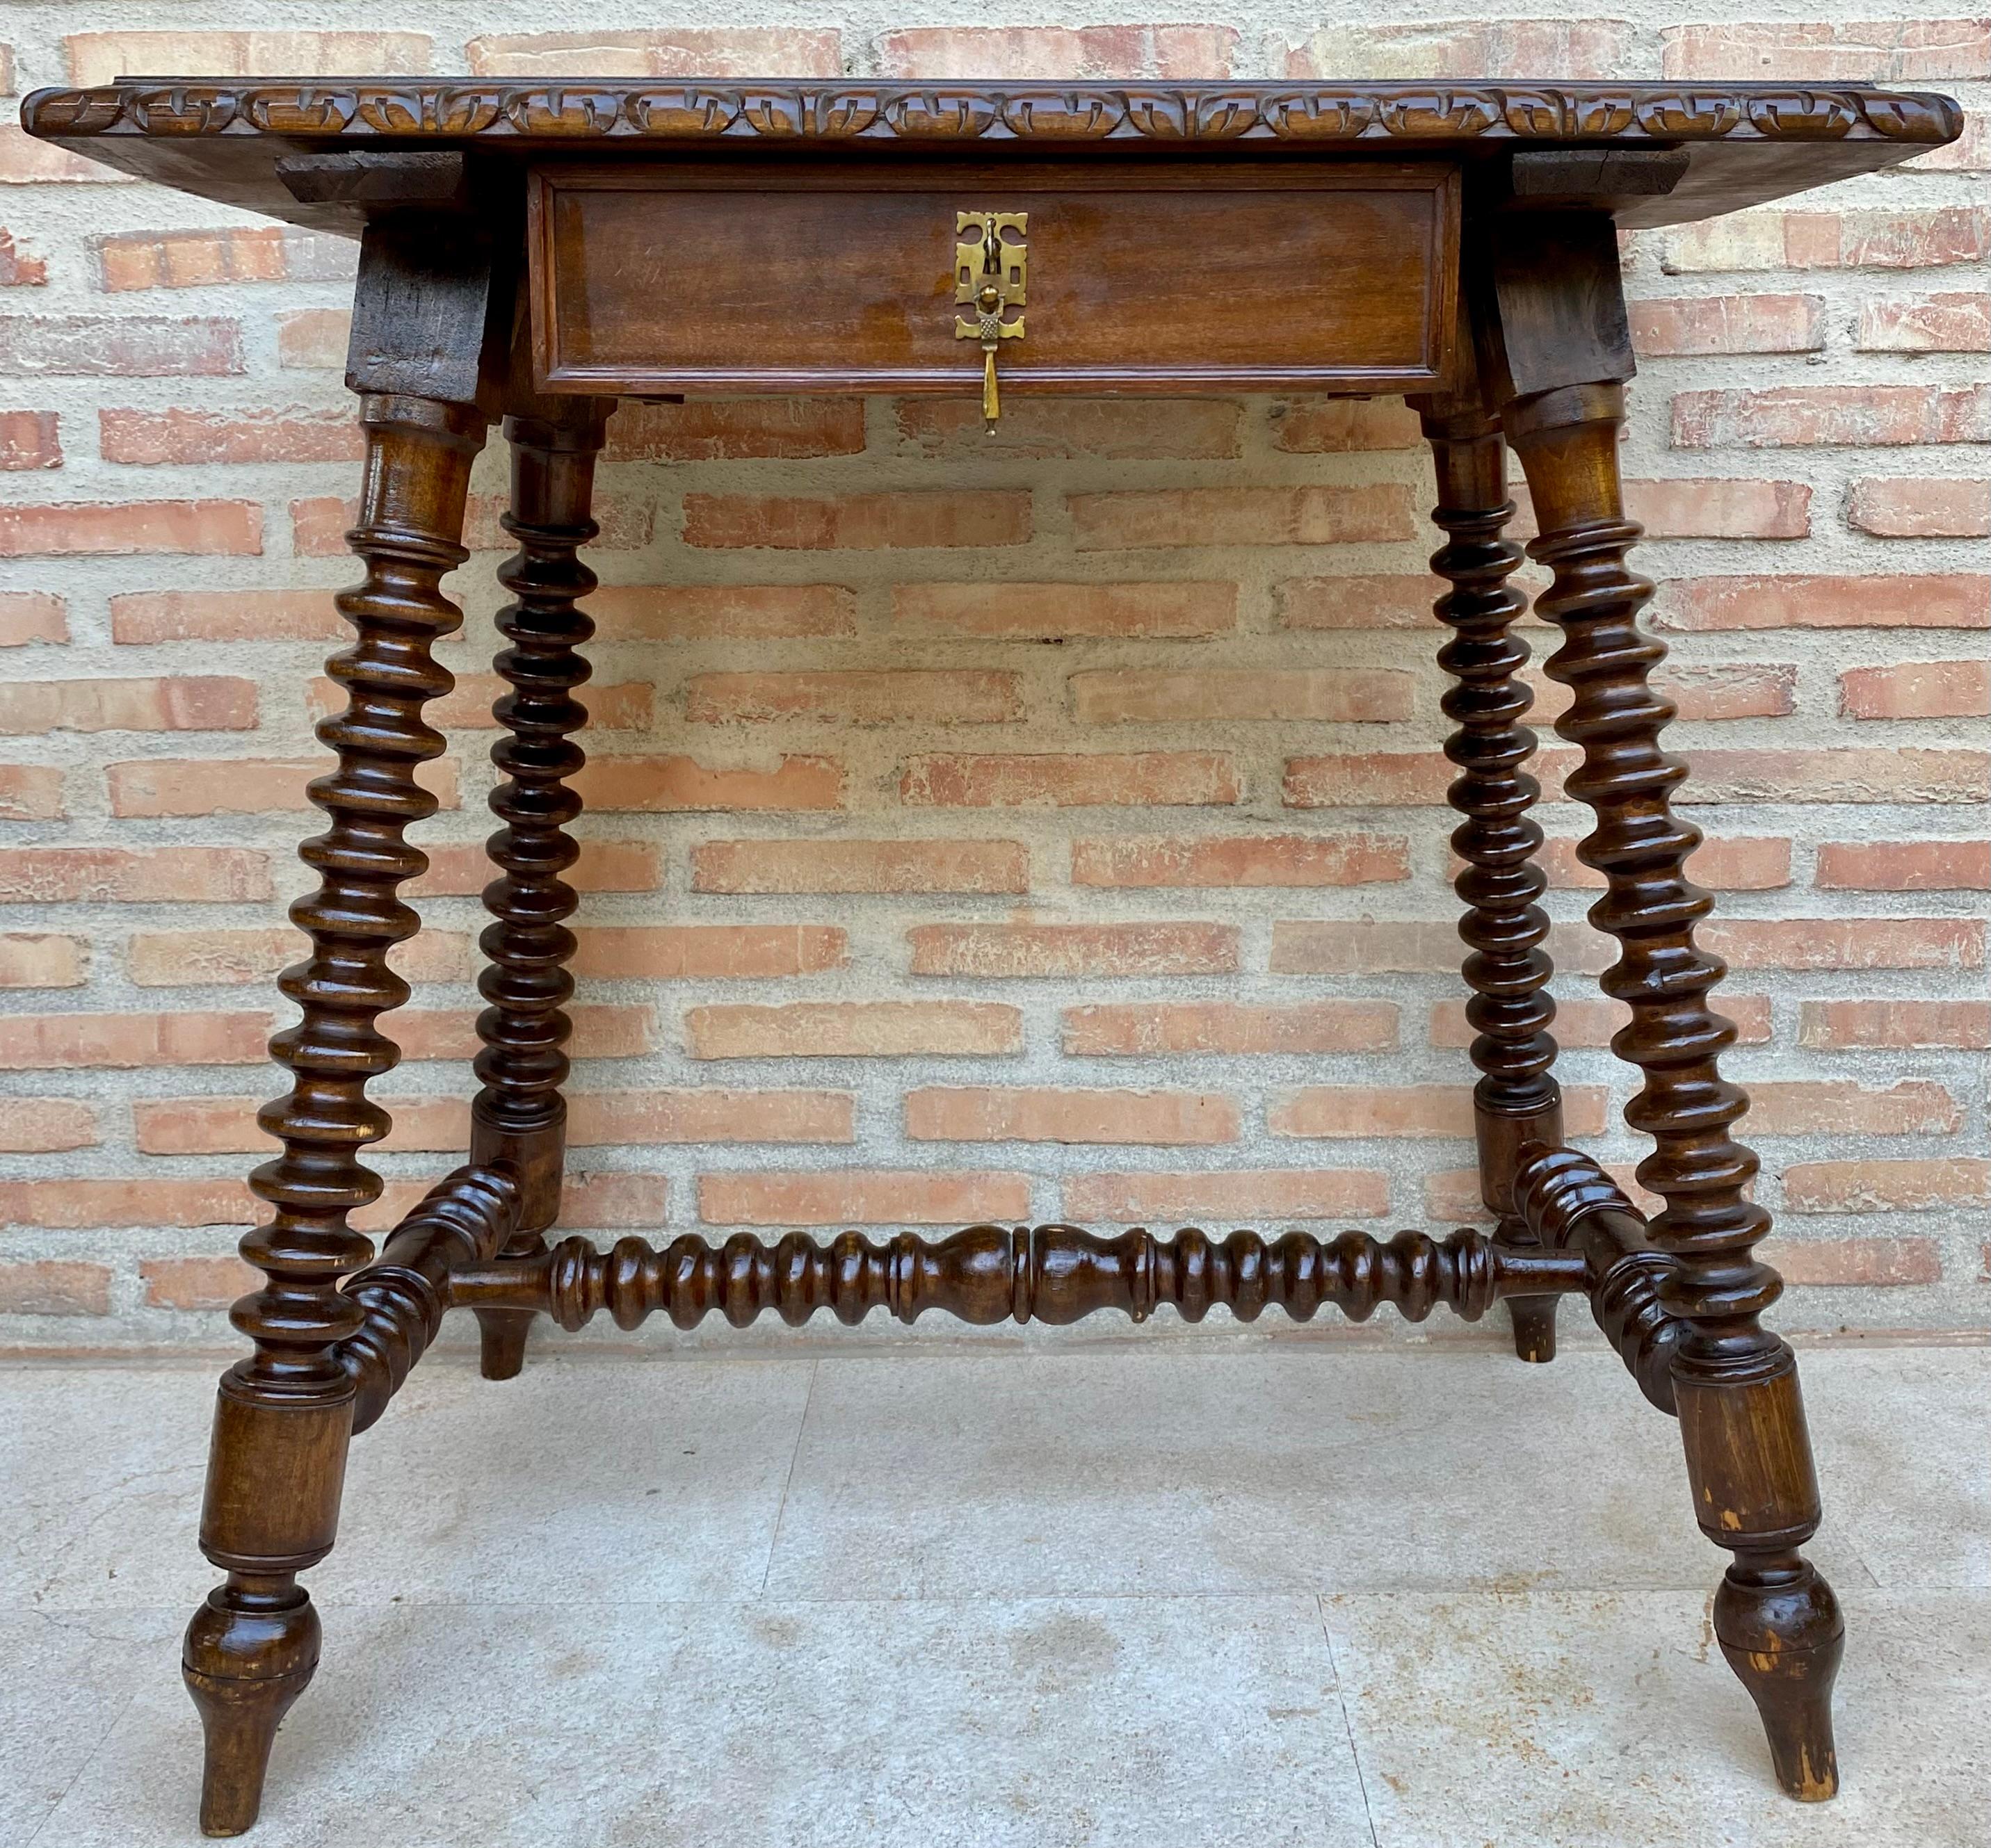 Mid-20th century French side table in carved walnut with a small front drawer with a bronze handle and a brass latch with its key supported by four turned legs joined by a turned stretcher.